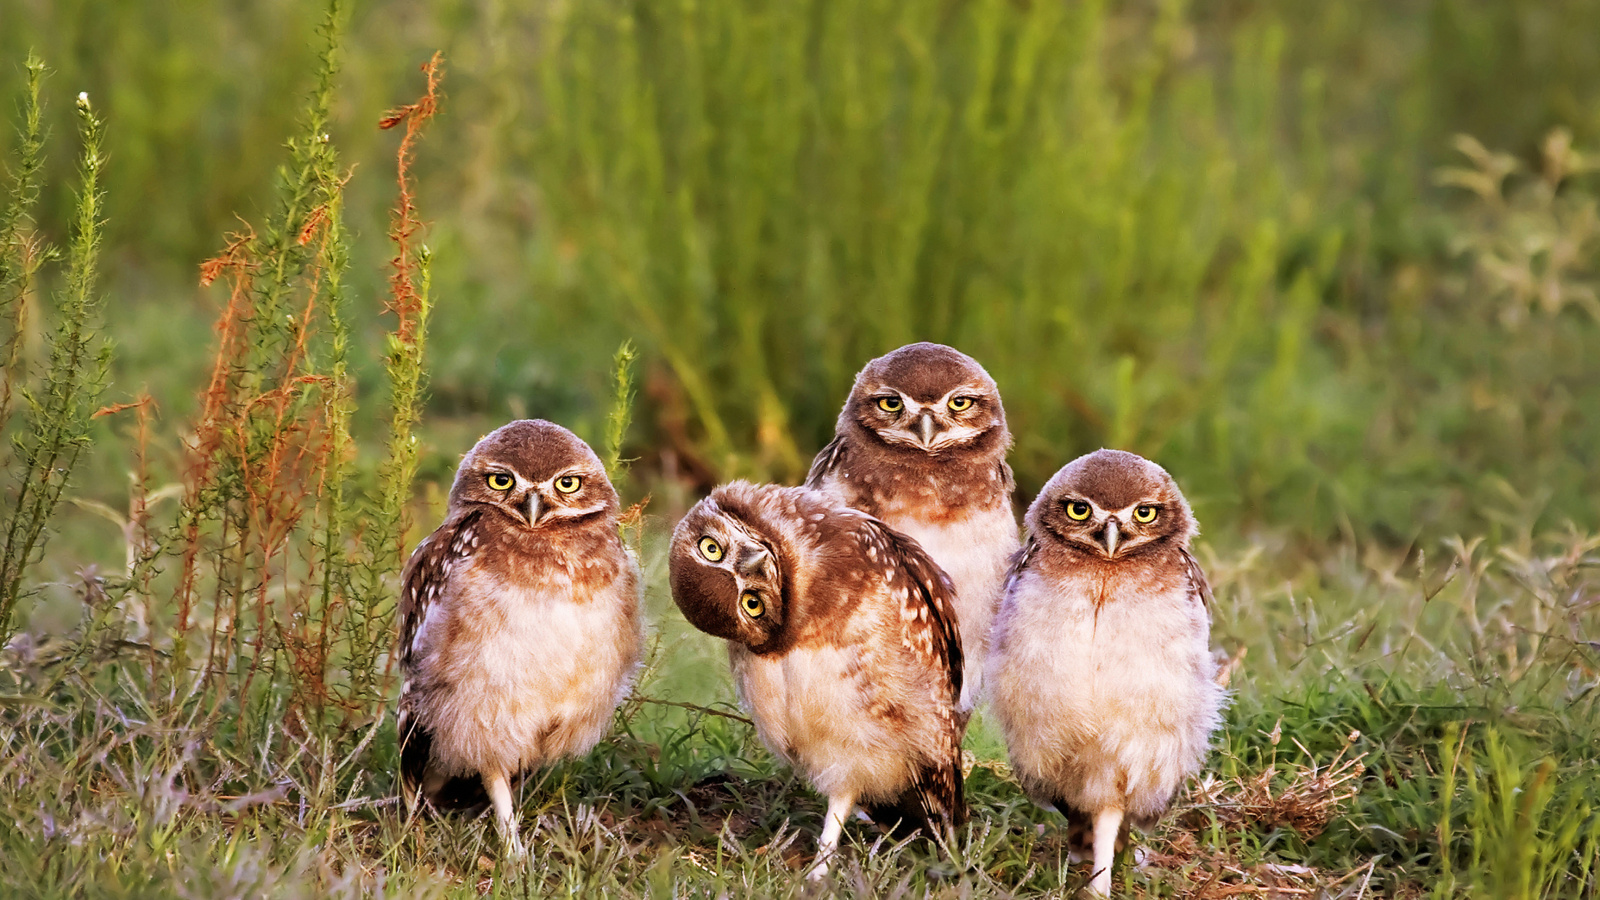 Morning with owls wallpaper 1600x900